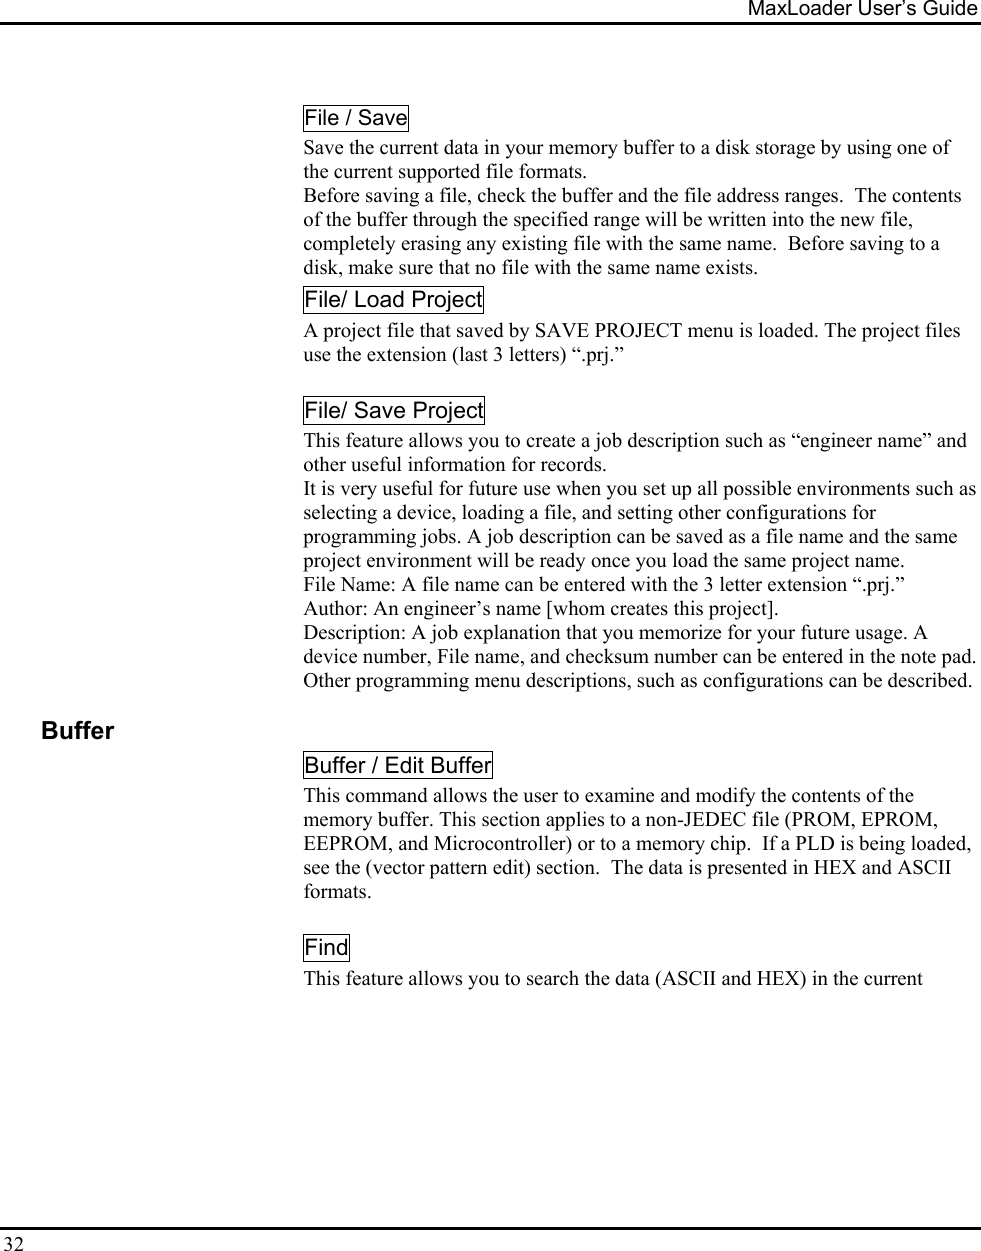 MaxLoader User’s Guide  32  File / Save Save the current data in your memory buffer to a disk storage by using one of the current supported file formats. Before saving a file, check the buffer and the file address ranges.  The contents of the buffer through the specified range will be written into the new file, completely erasing any existing file with the same name.  Before saving to a disk, make sure that no file with the same name exists. File/ Load Project A project file that saved by SAVE PROJECT menu is loaded. The project files use the extension (last 3 letters) “.prj.”    File/ Save Project This feature allows you to create a job description such as “engineer name” and other useful information for records. It is very useful for future use when you set up all possible environments such as selecting a device, loading a file, and setting other configurations for programming jobs. A job description can be saved as a file name and the same project environment will be ready once you load the same project name.  File Name: A file name can be entered with the 3 letter extension “.prj.” Author: An engineer’s name [whom creates this project]. Description: A job explanation that you memorize for your future usage. A device number, File name, and checksum number can be entered in the note pad.  Other programming menu descriptions, such as configurations can be described.    Buffer Buffer / Edit Buffer This command allows the user to examine and modify the contents of the memory buffer. This section applies to a non-JEDEC file (PROM, EPROM, EEPROM, and Microcontroller) or to a memory chip.  If a PLD is being loaded, see the (vector pattern edit) section.  The data is presented in HEX and ASCII formats.   Find    This feature allows you to search the data (ASCII and HEX) in the current   